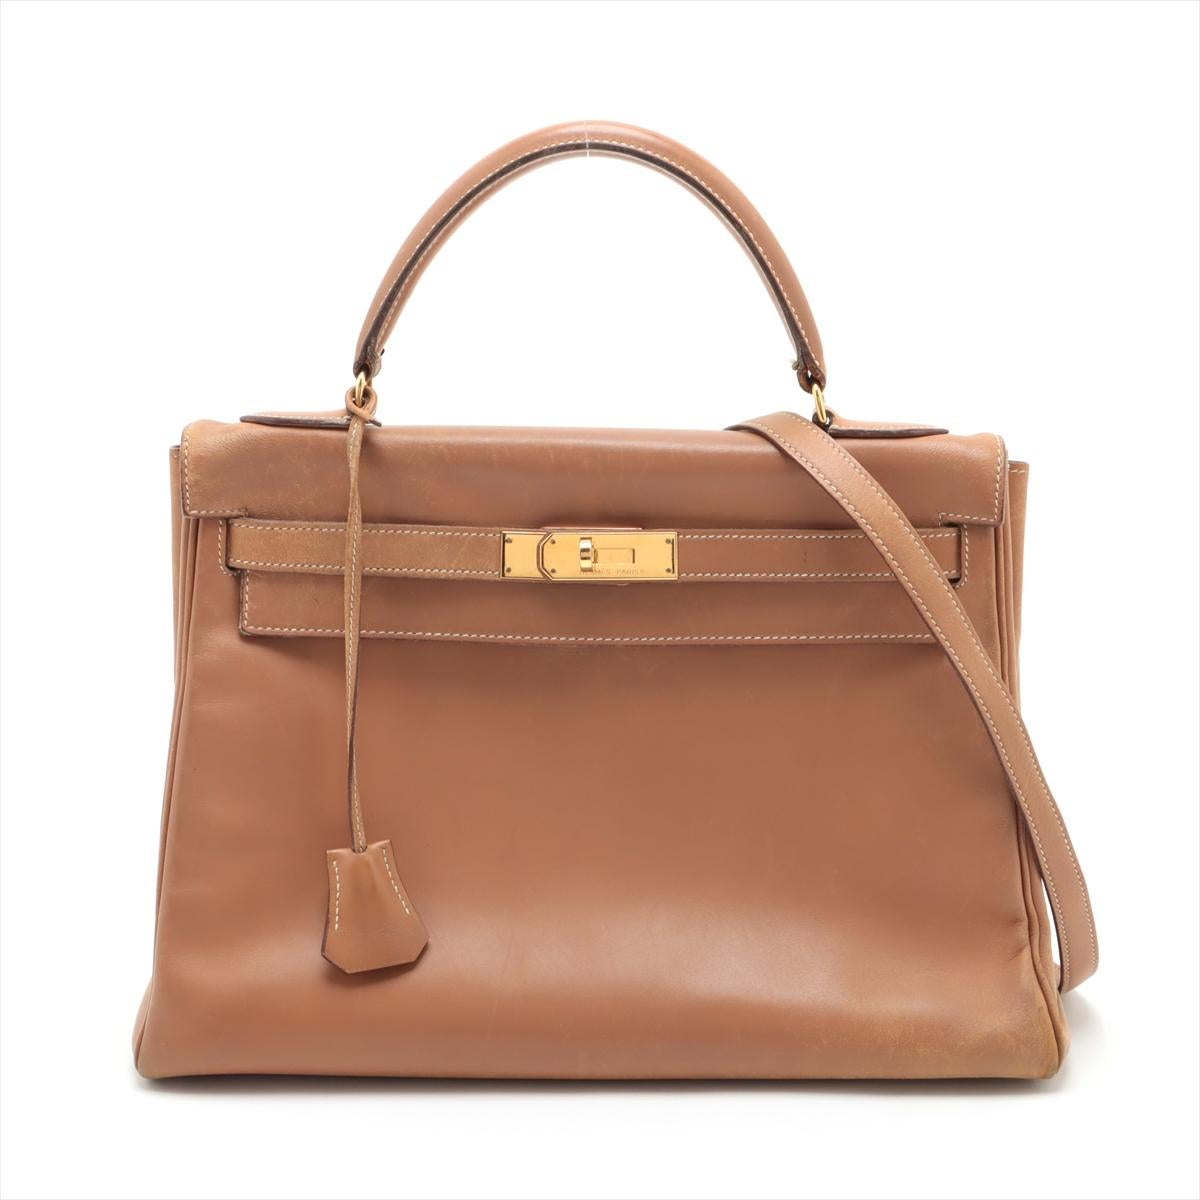 The Hermes Kelly 32 in Veau Gulliver leather and Gold Brown color is a symbol of timeless luxury and exquisite craftsmanship. Meticulously crafted by Hermes artisans, the Kelly 32 is renowned for its iconic silhouette and sophisticated design. The